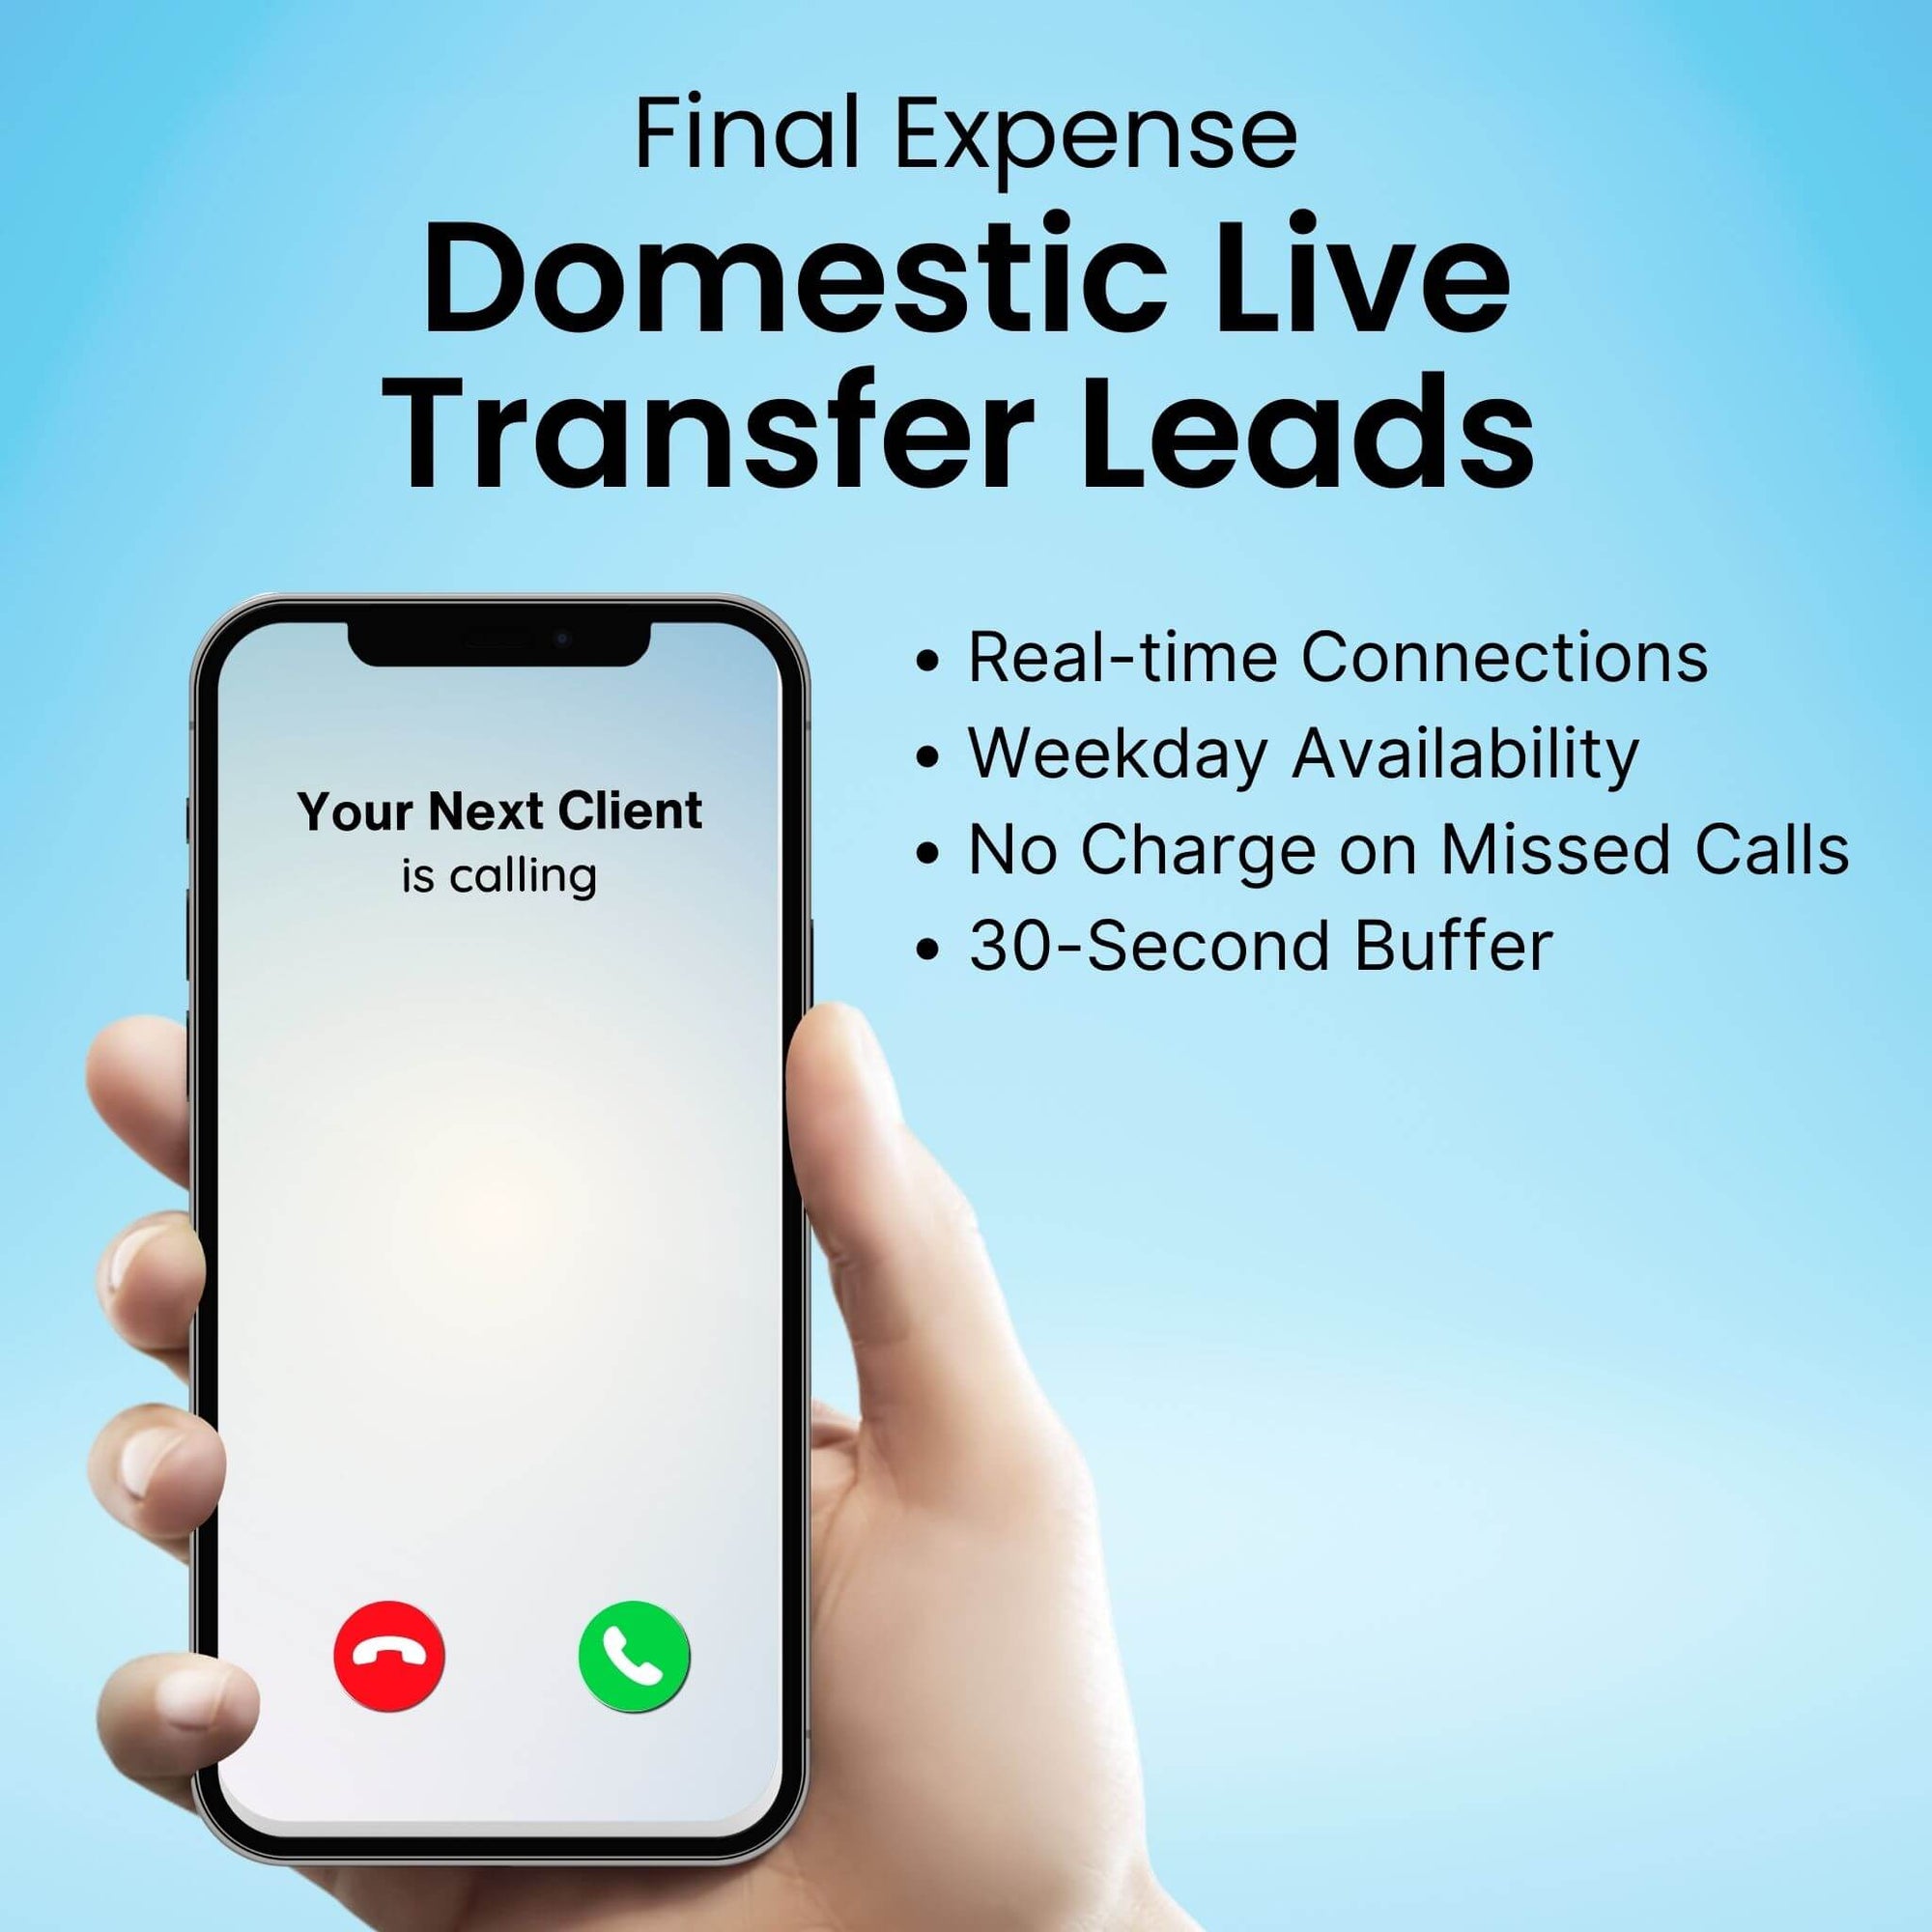 Domestic Live Transfer Leads - Final Expense